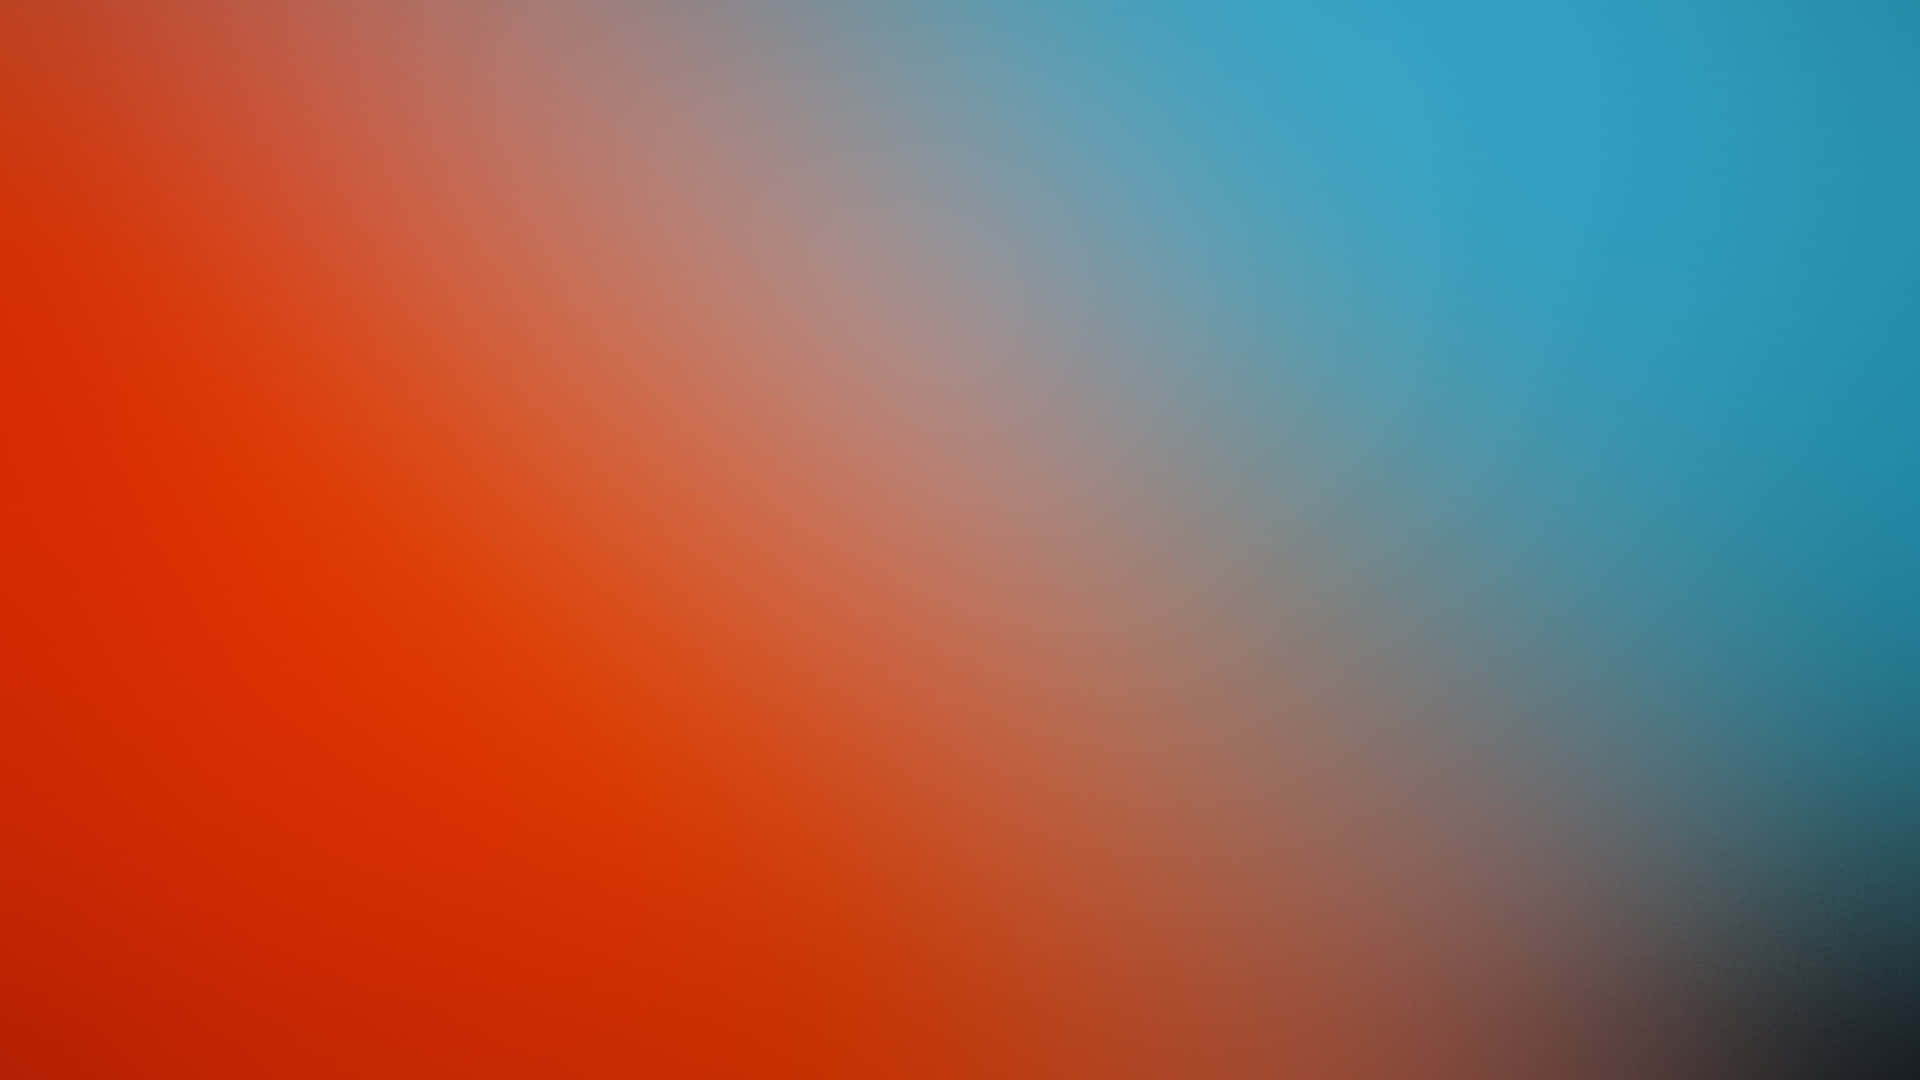 Bright orange and blue background in an abstract design